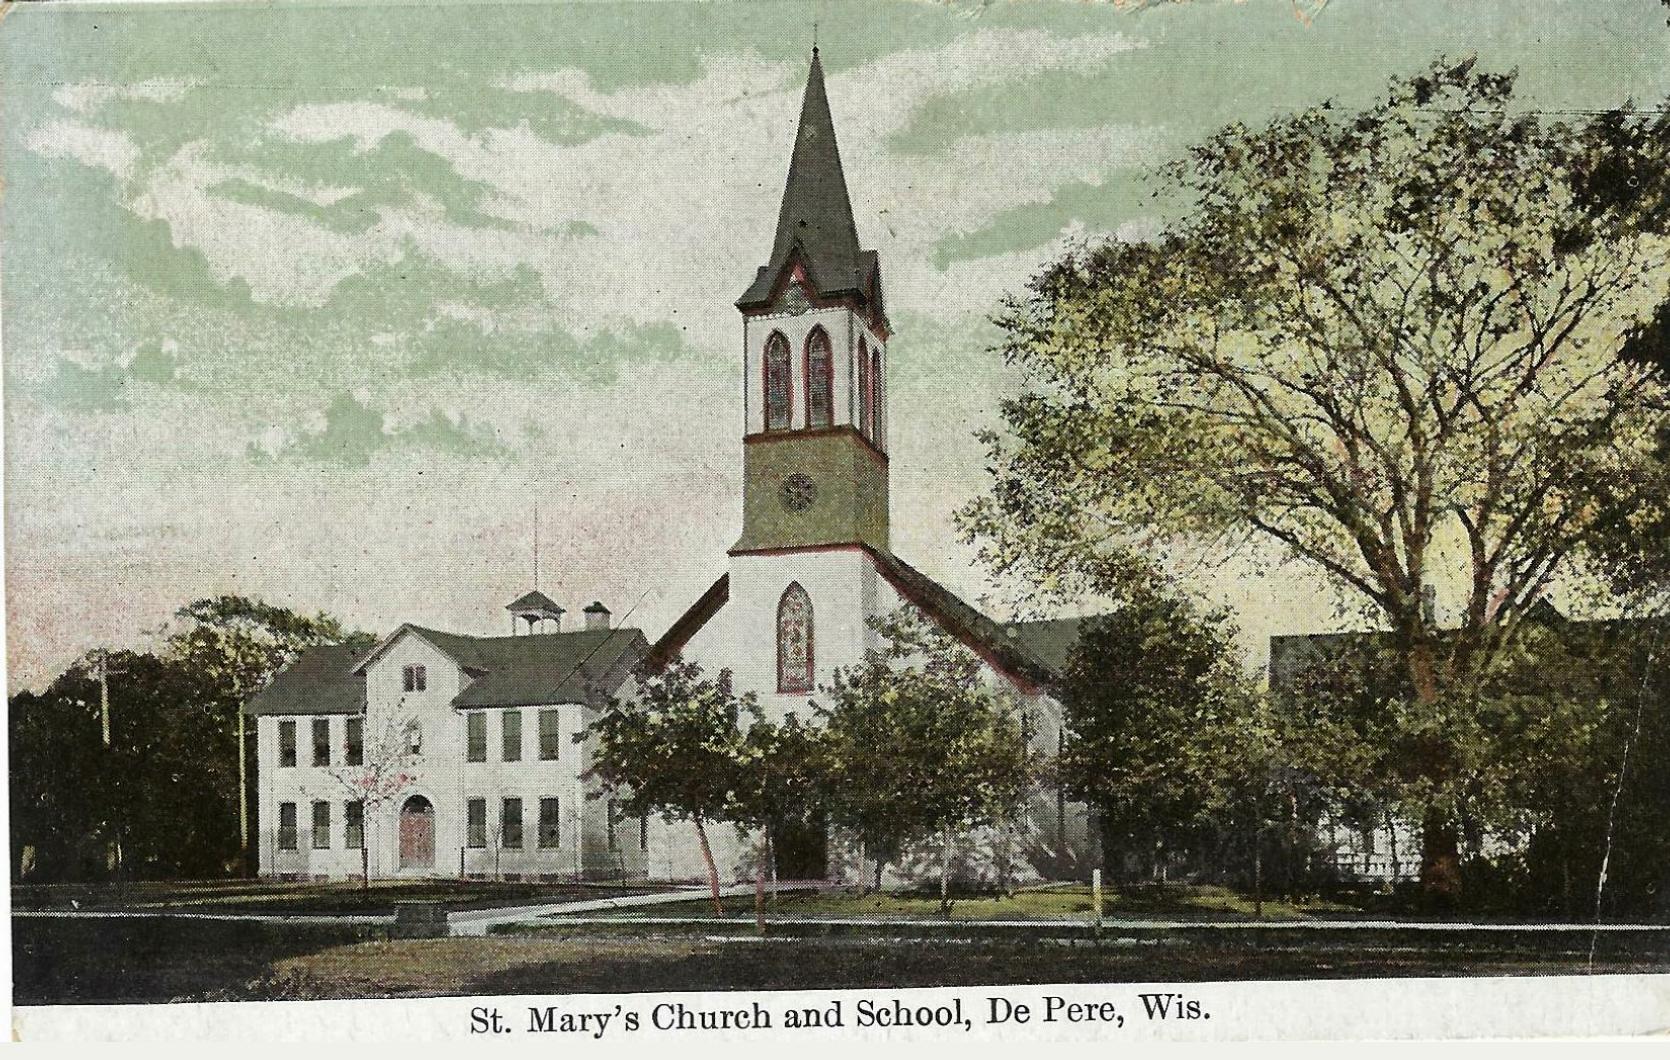 St. Mary's Church and School